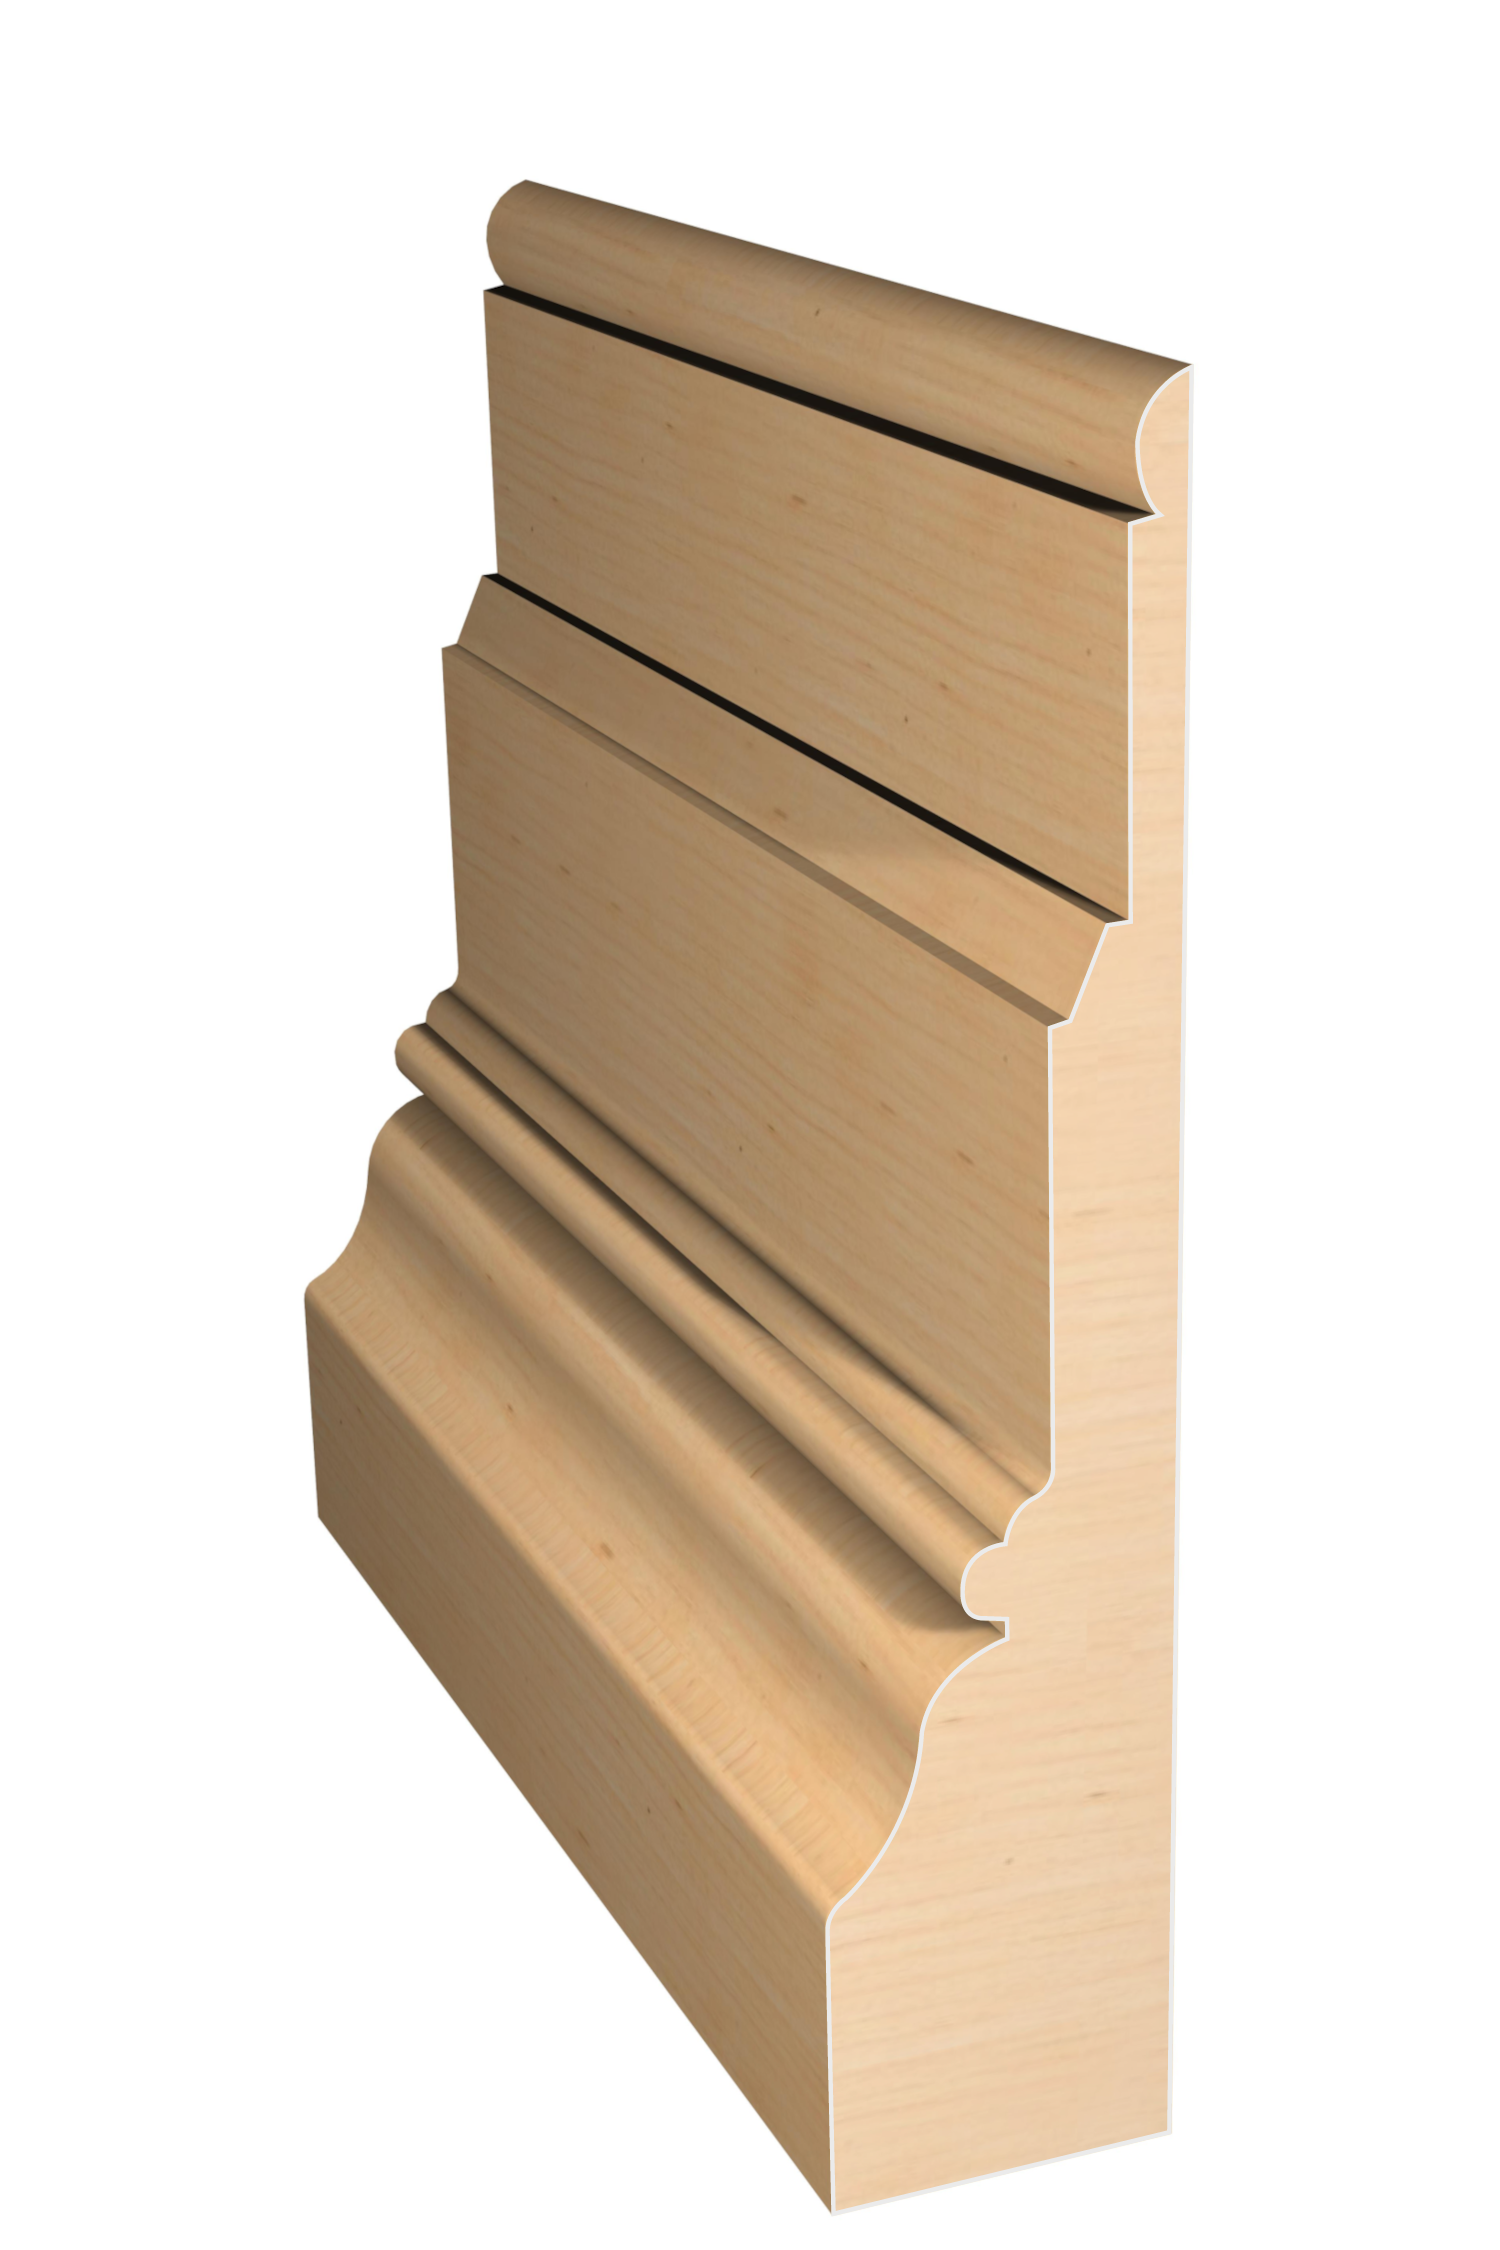 Three dimensional rendering of custom base wood molding BAPL64 made by Public Lumber Company in Detroit.